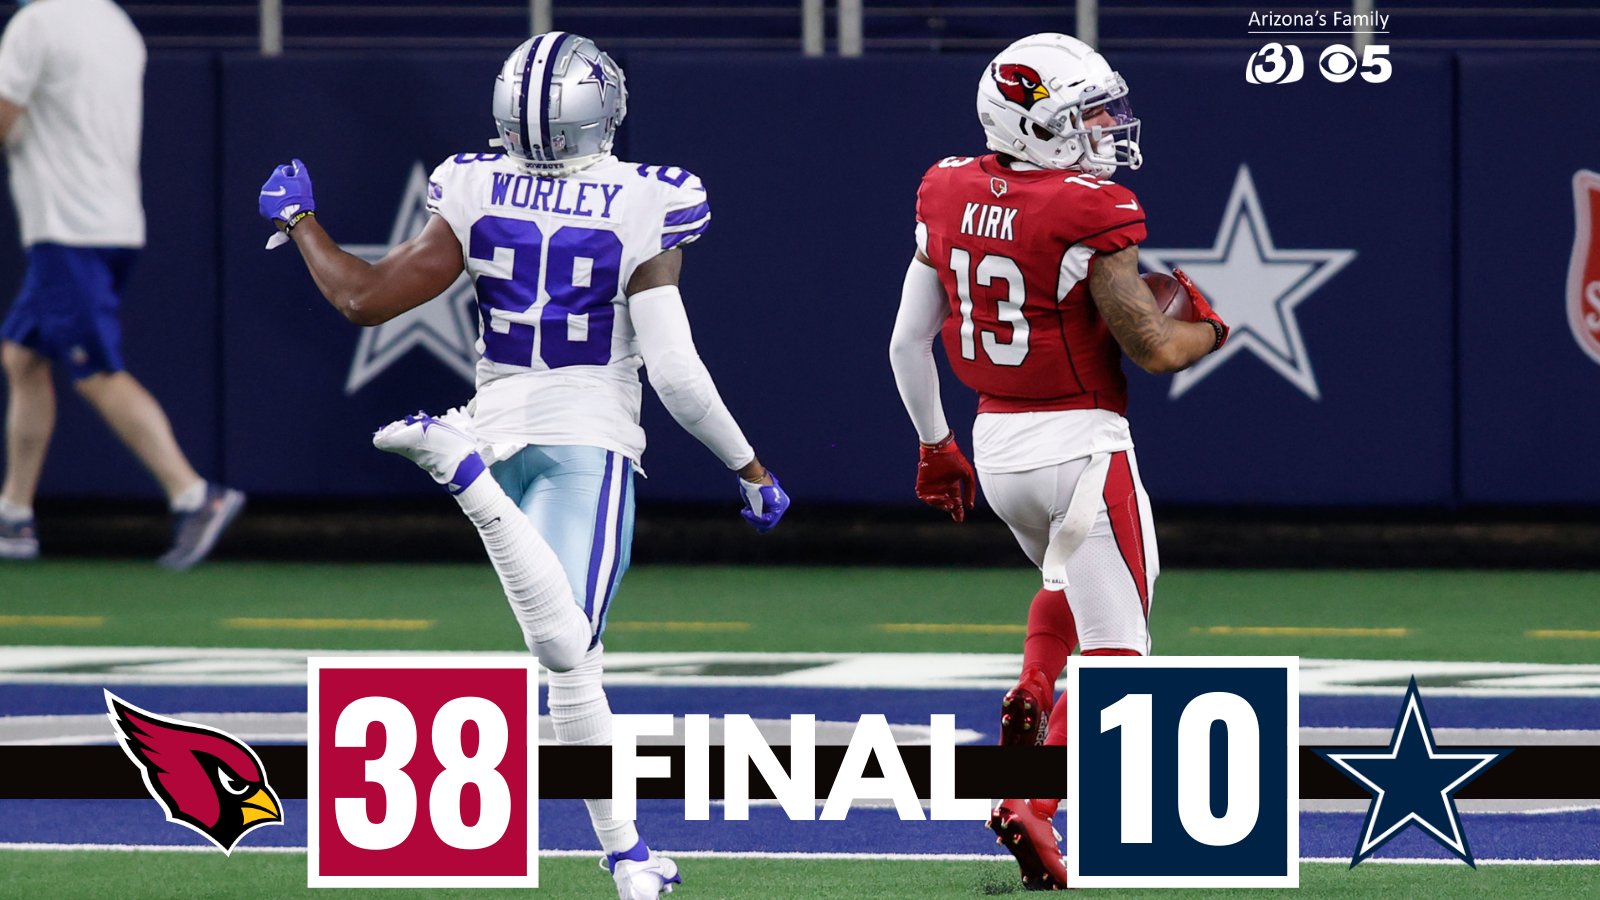 azfamily 3TV CBS 5 on X: 'FINAL: How about those Cardinals?! The